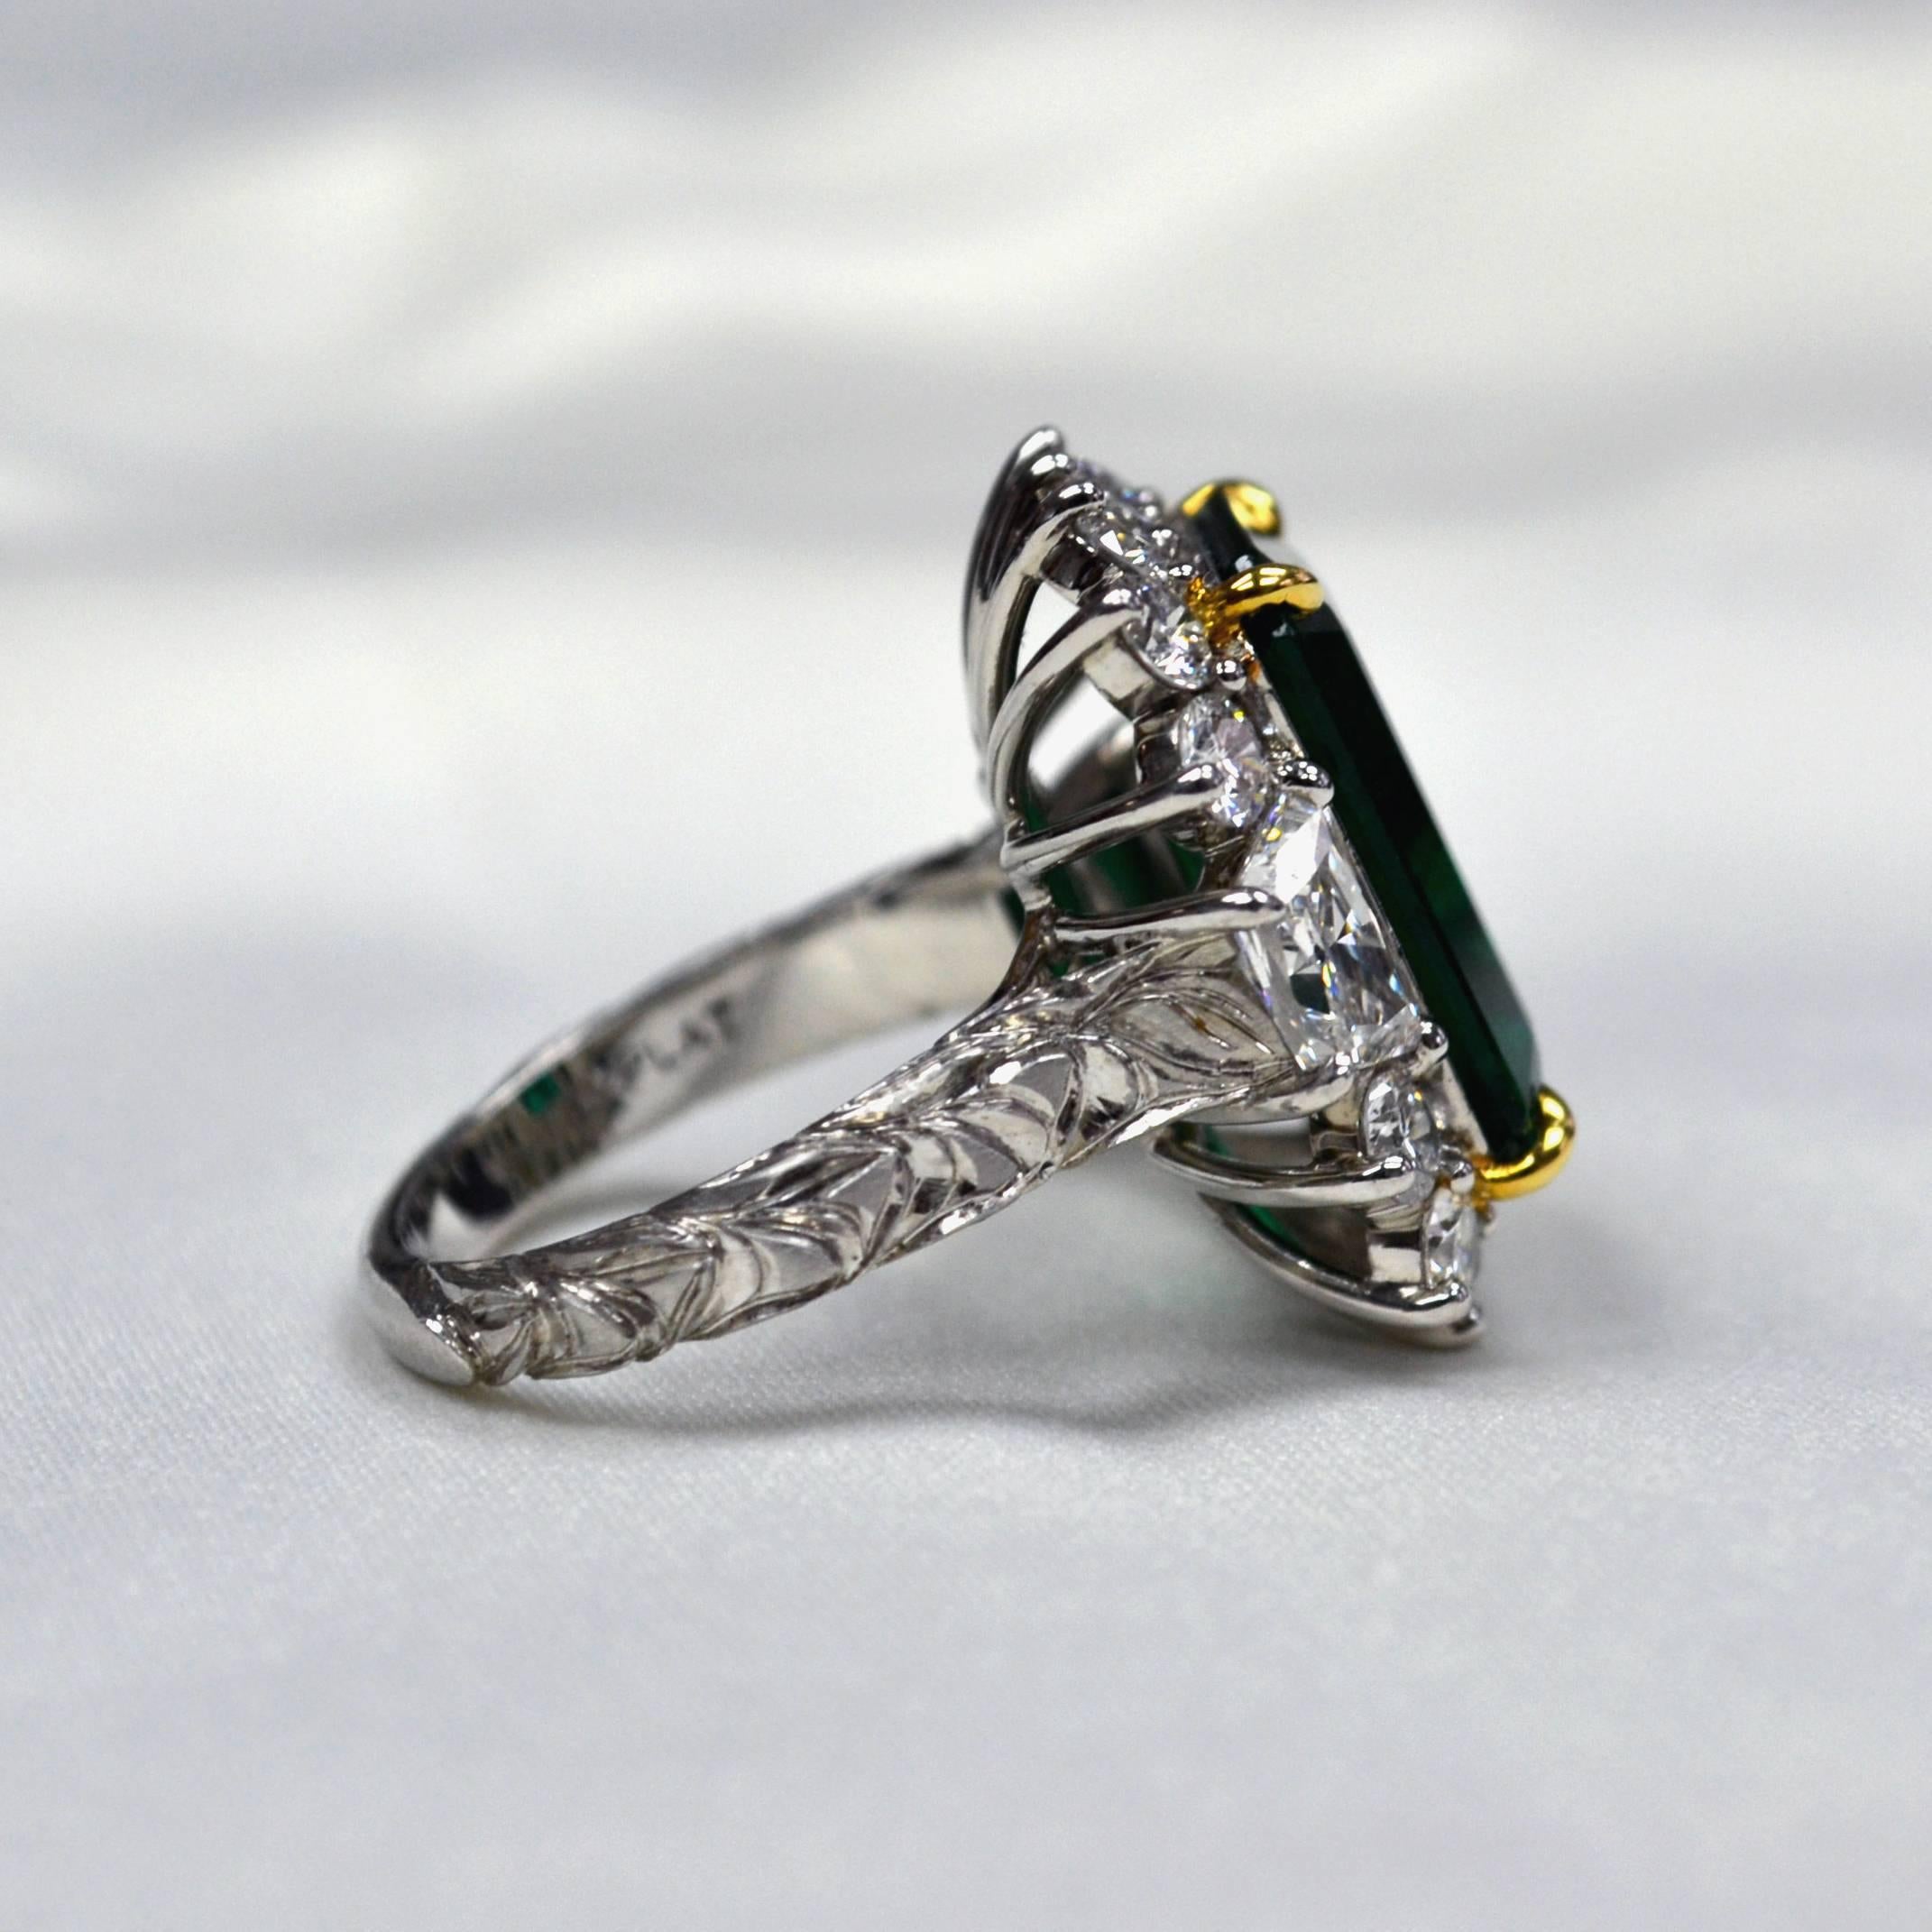 7.78 Carat Emerald Cut Emerald Diamond Platinum Engagement Ring In New Condition For Sale In New York, NY